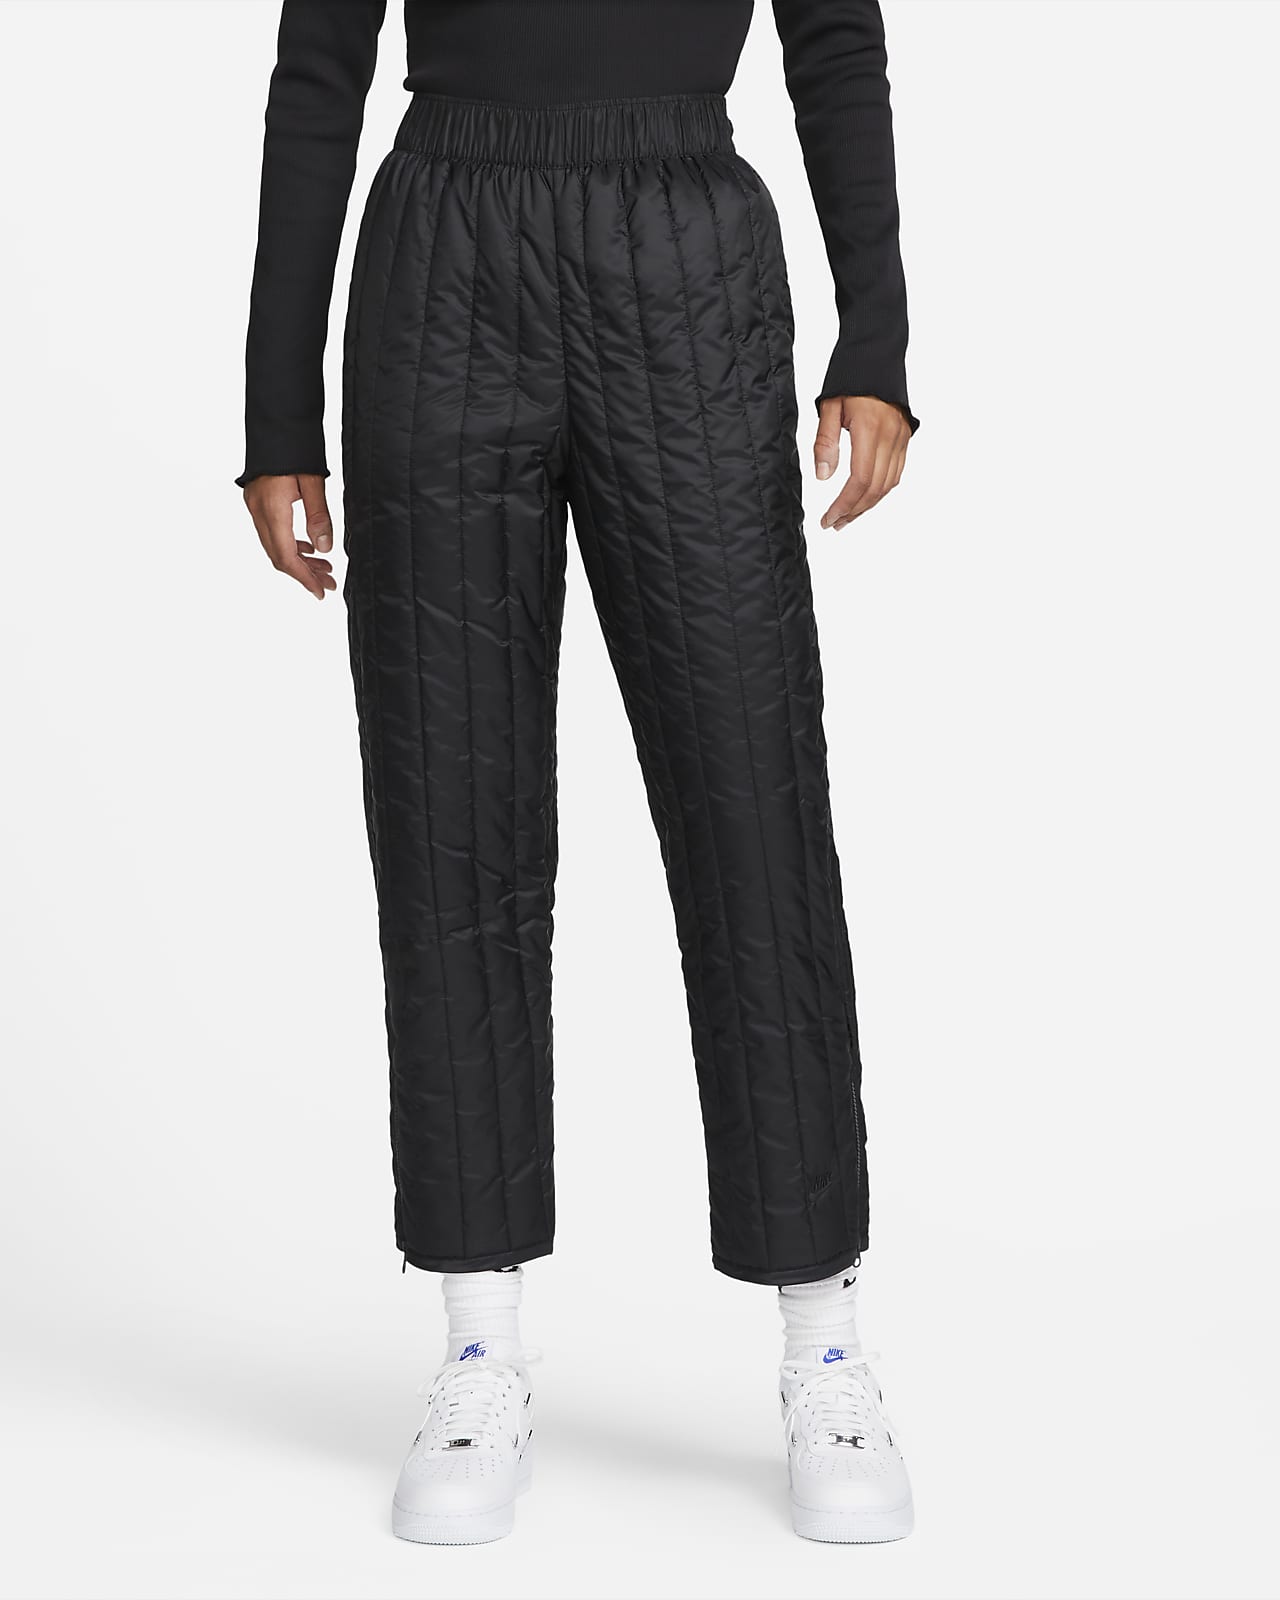 Nike Sportswear Therma-FIT Tech Pack Women's High-Waisted Trousers